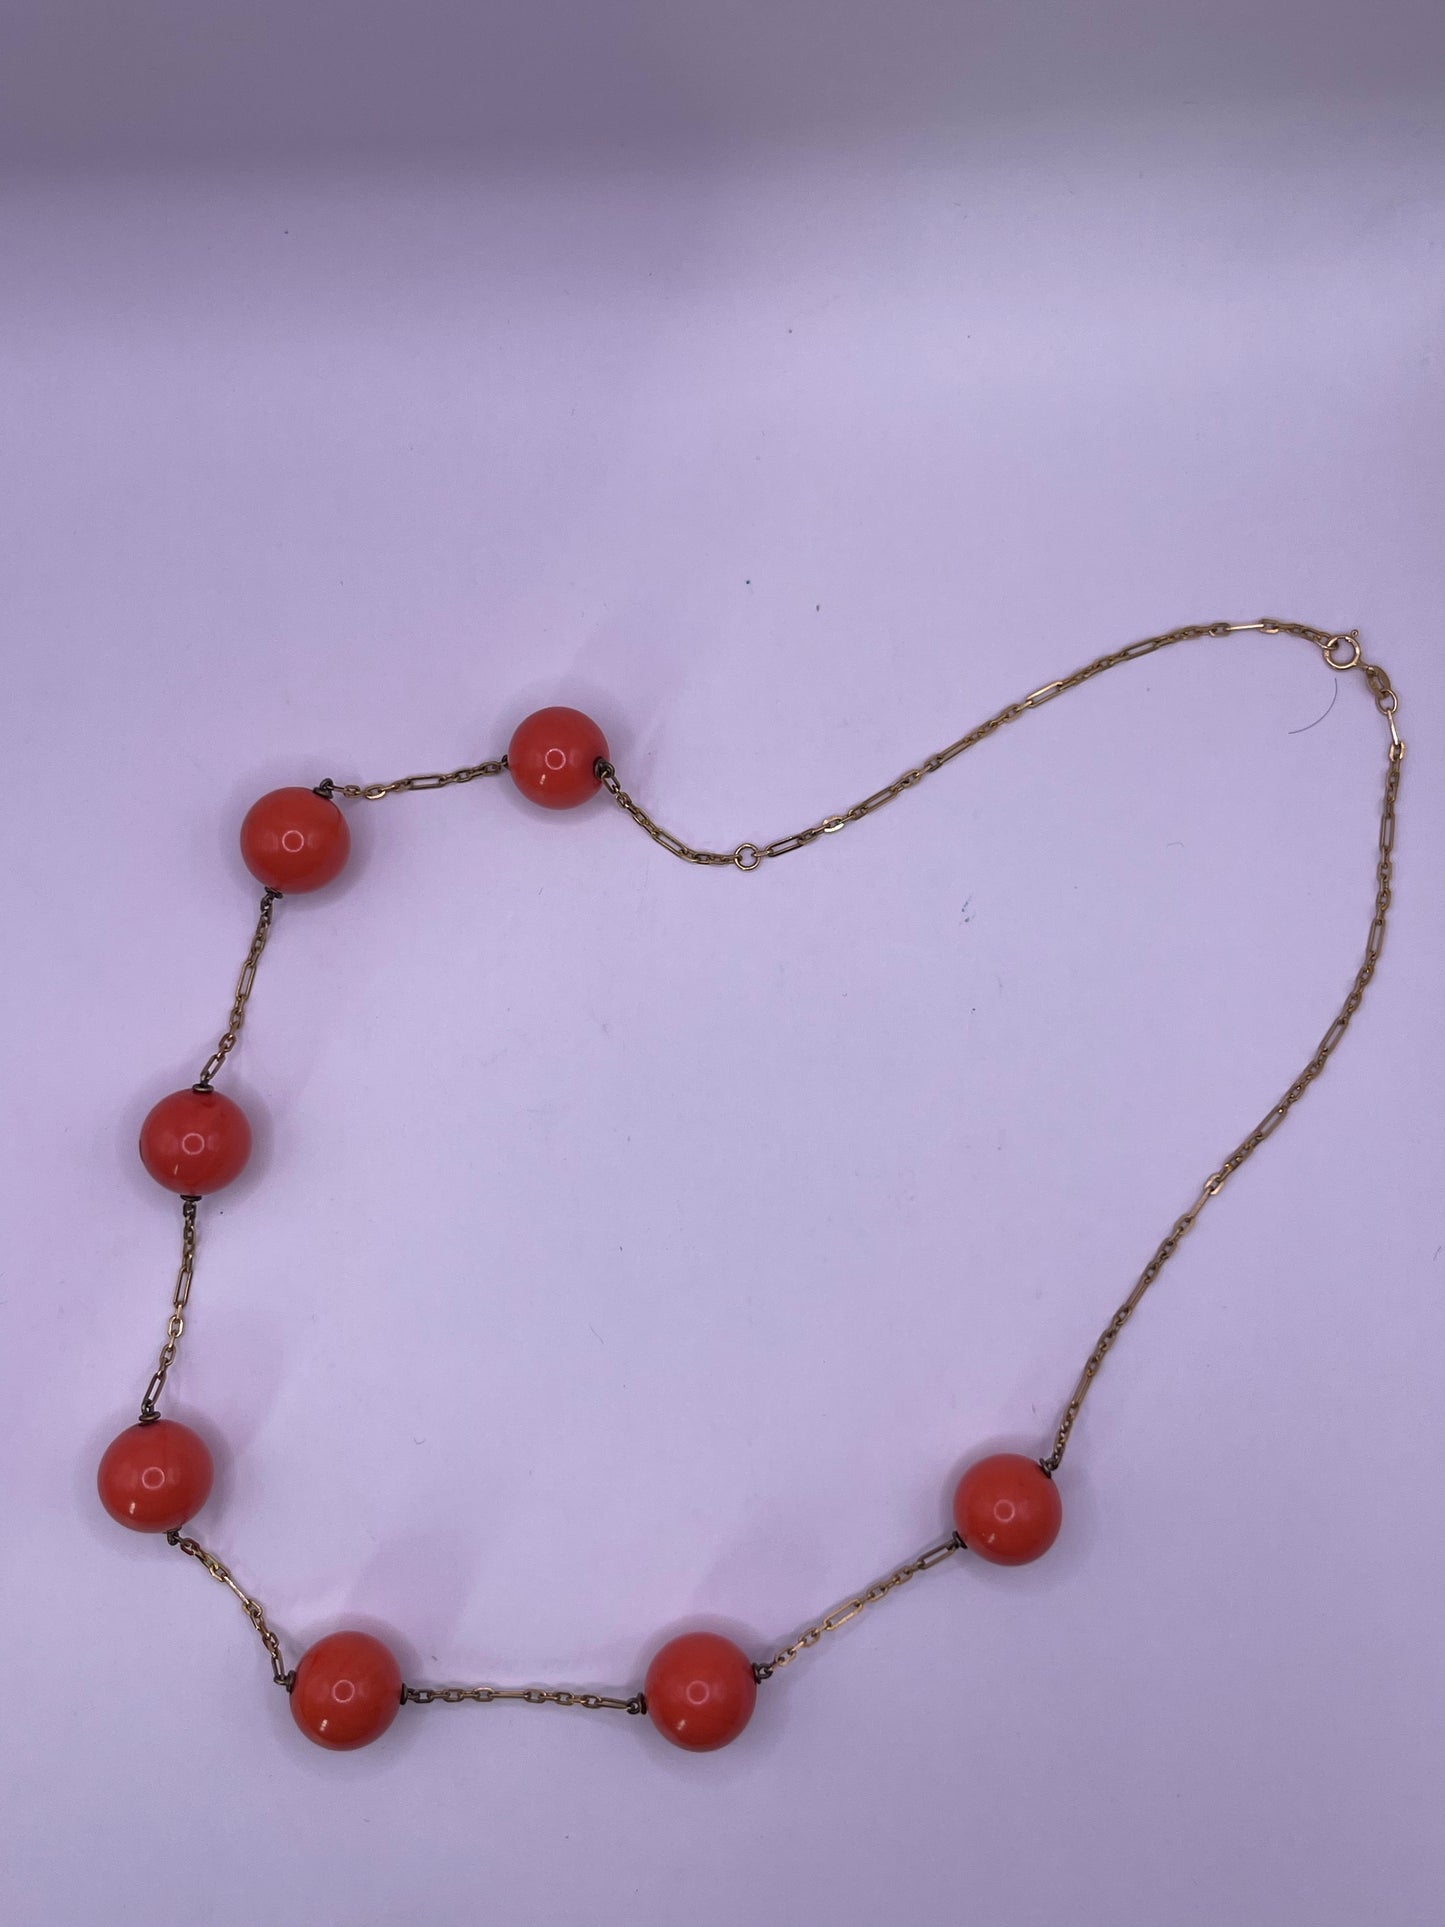 A necklace with coral beads on a 14kt chain